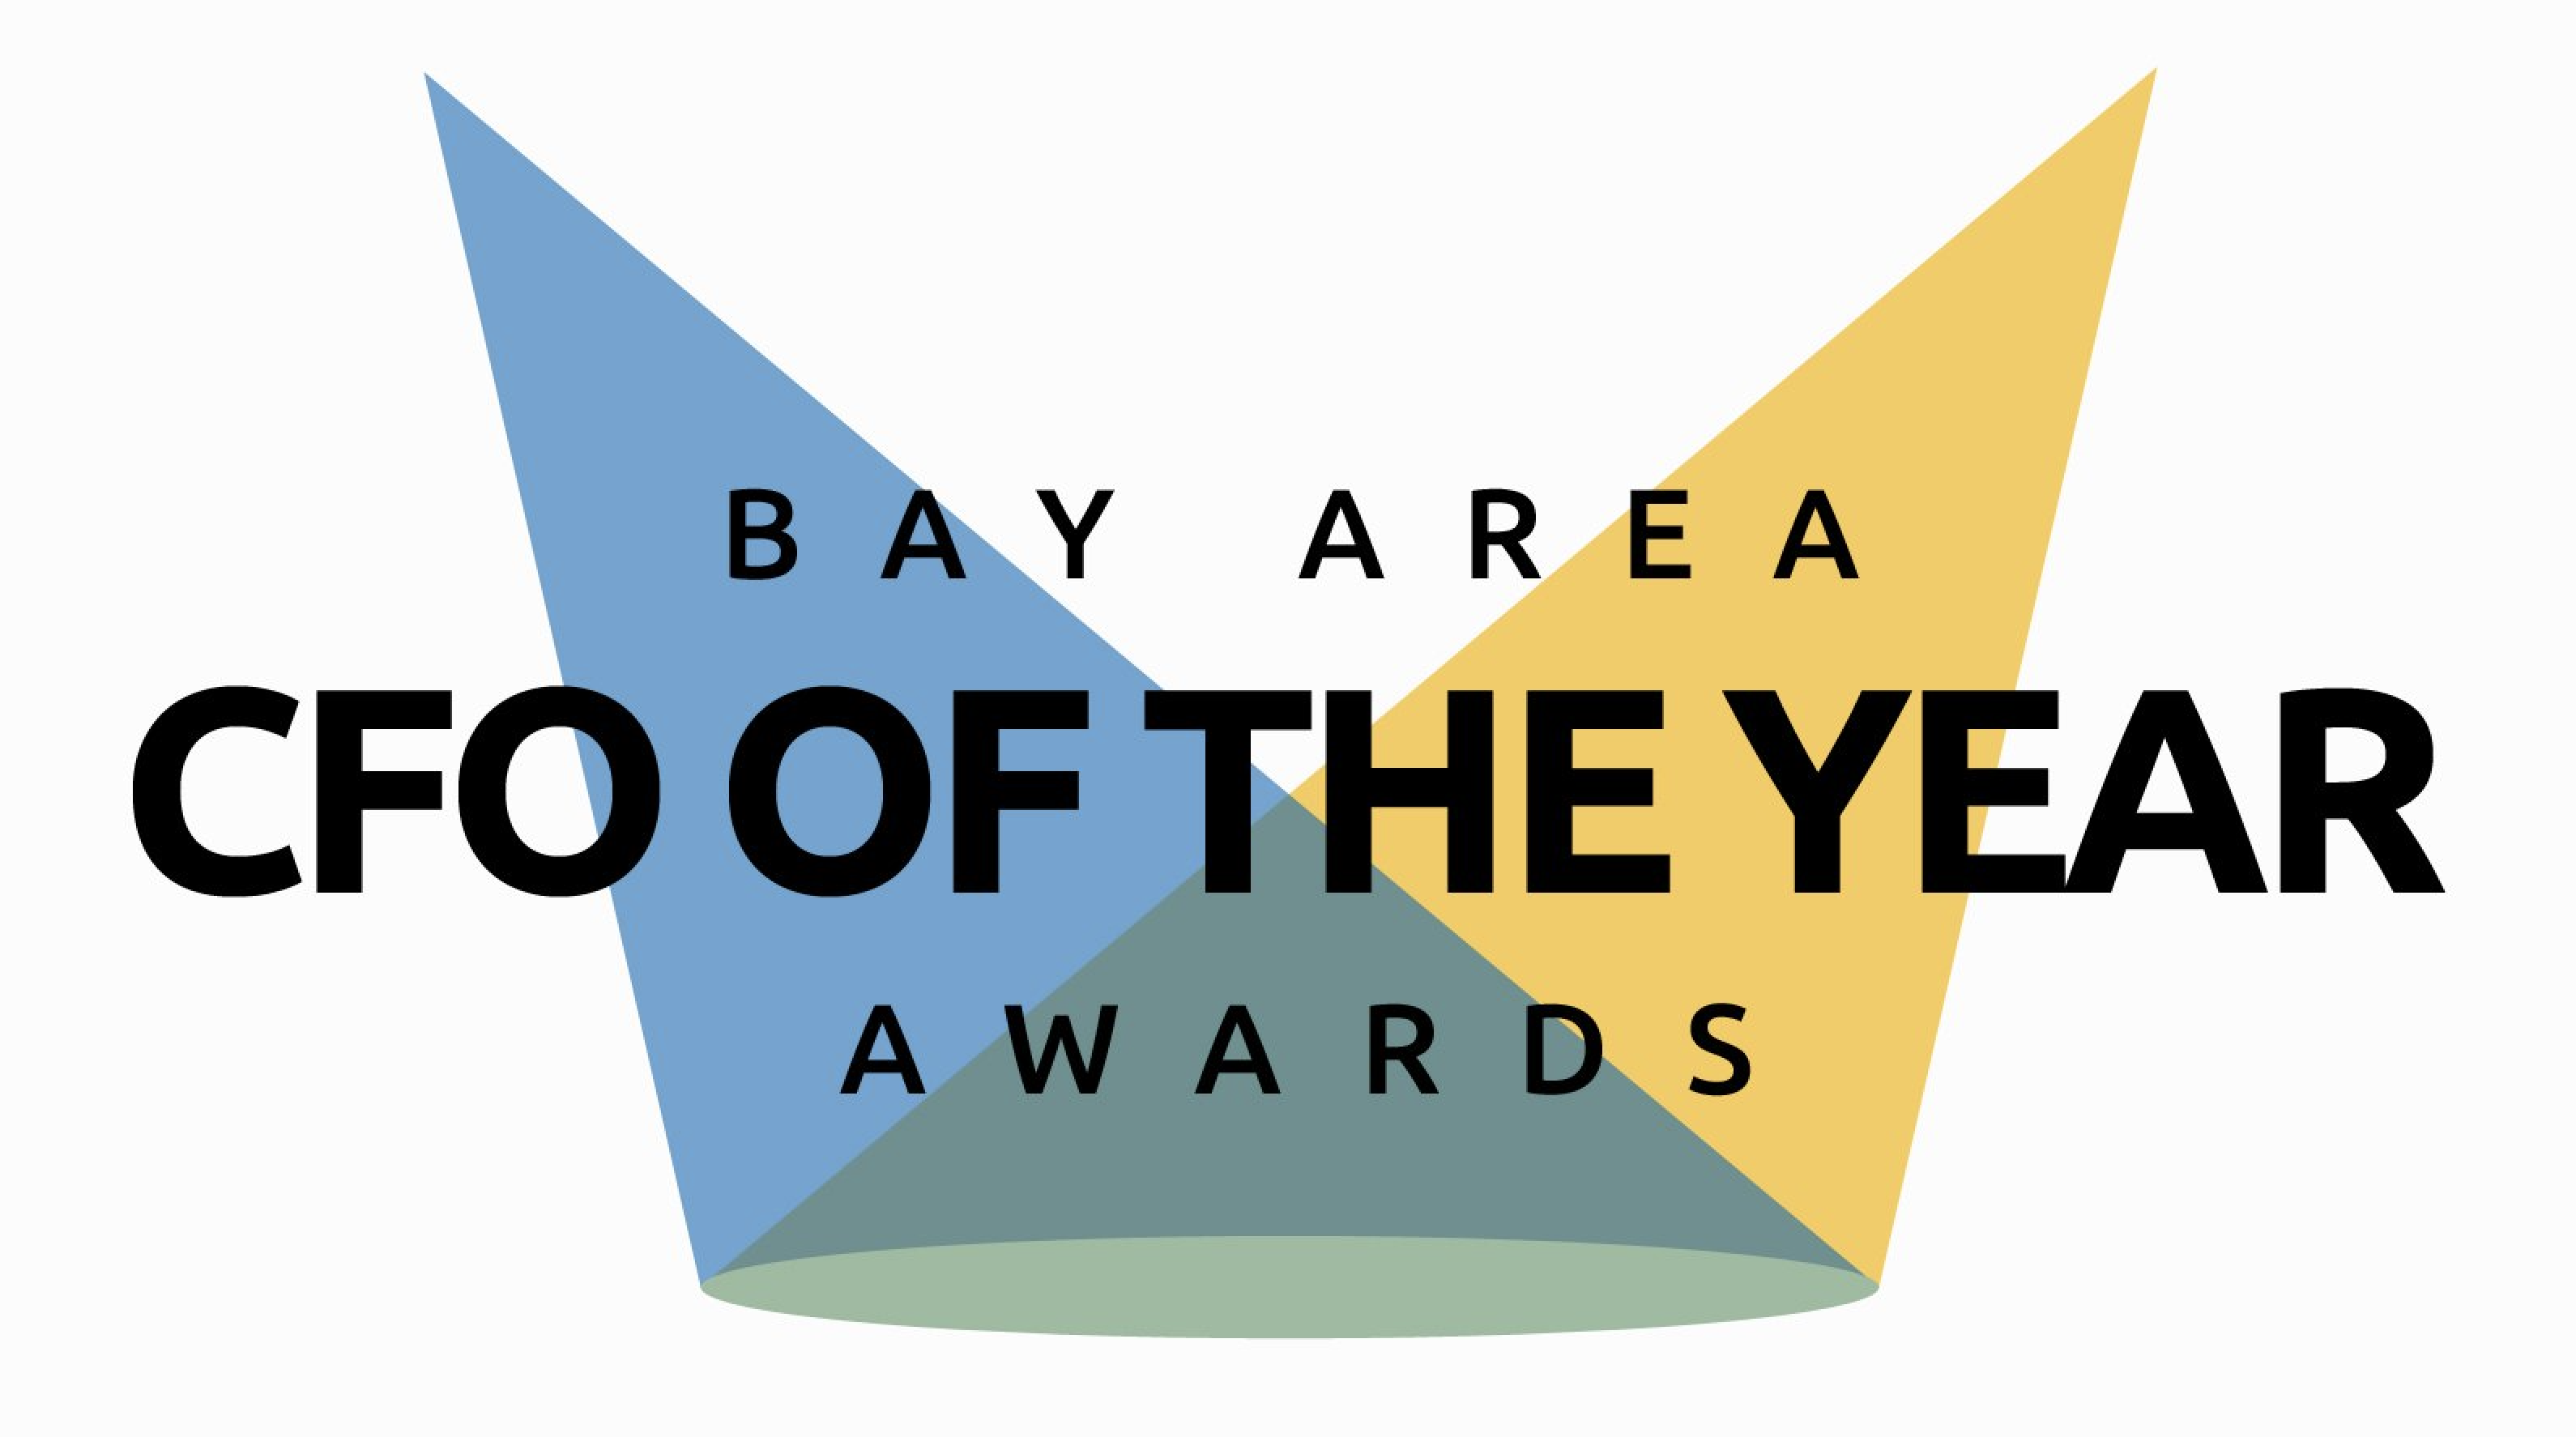 2019 Bay Area CFO of the Year